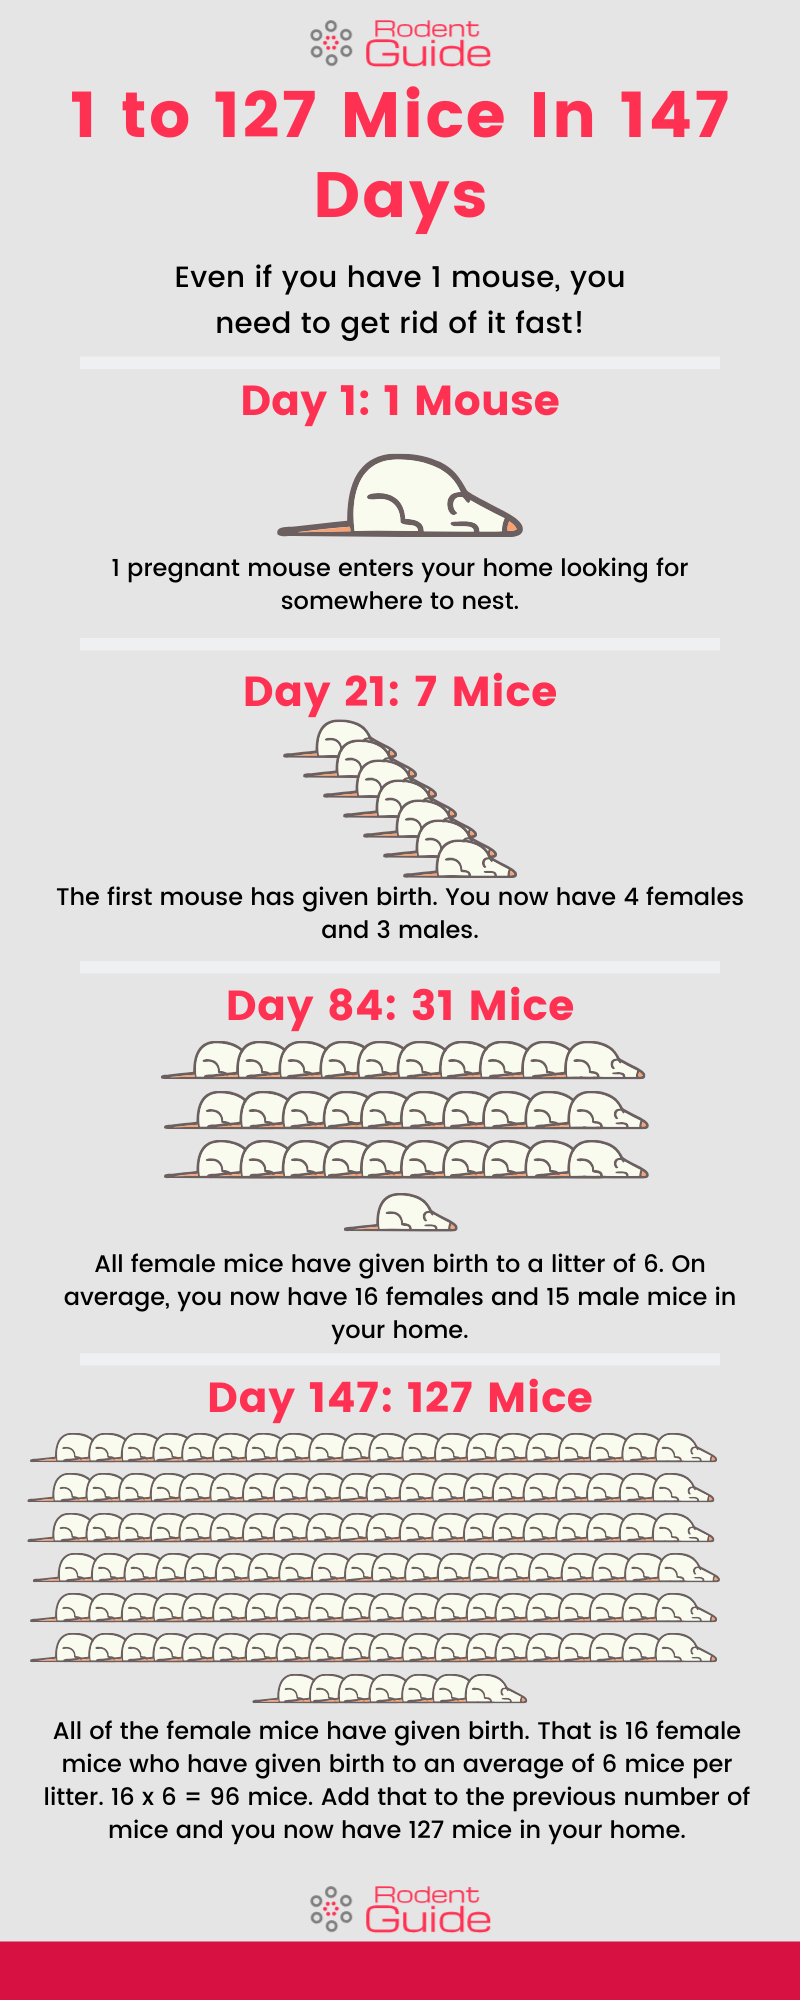 1 to 127 Mice In 147 Days Infographic